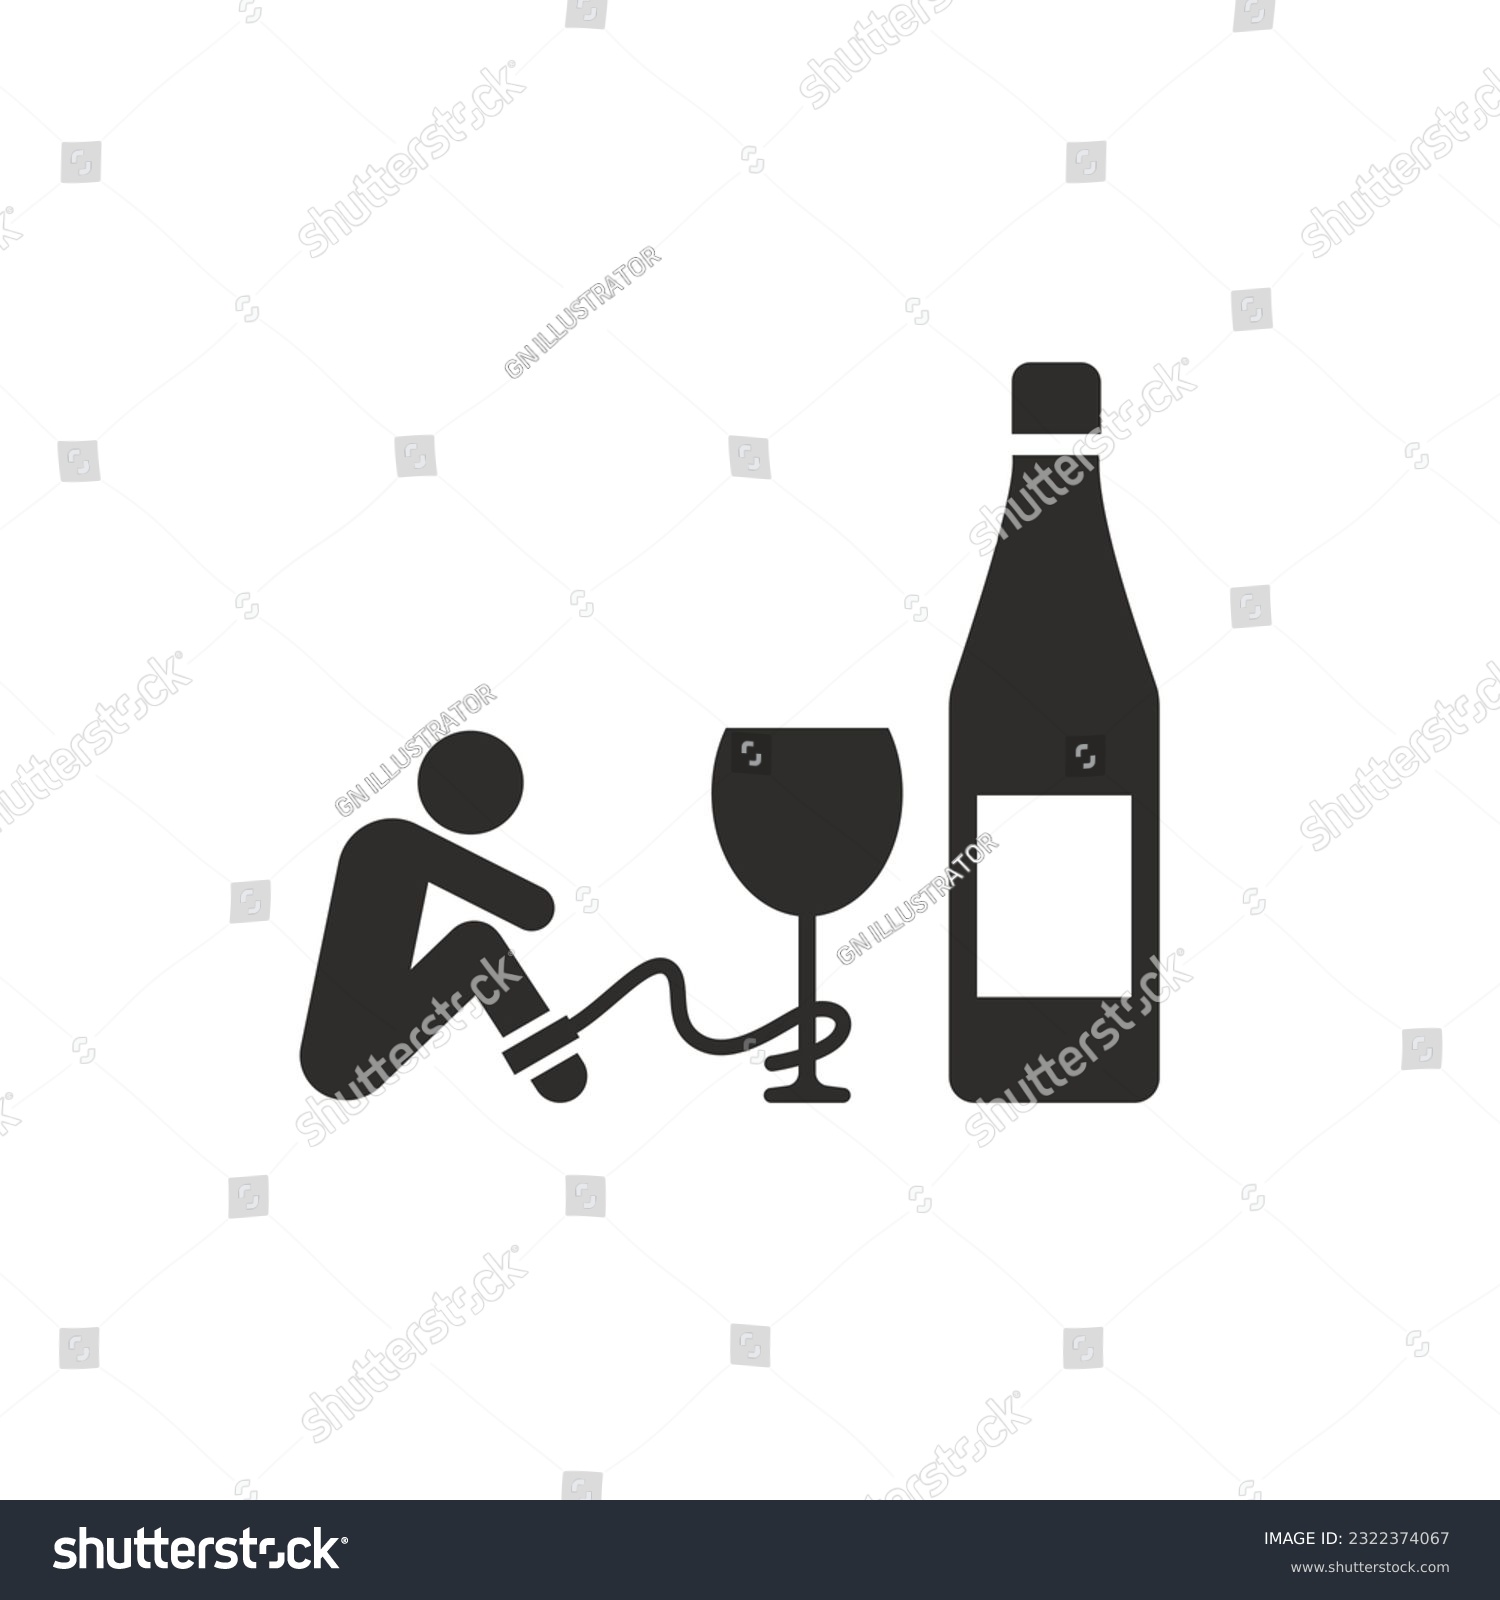 SVG of alcoholic with bottle icon, alcohol addiction, drinking human, vector illustration svg